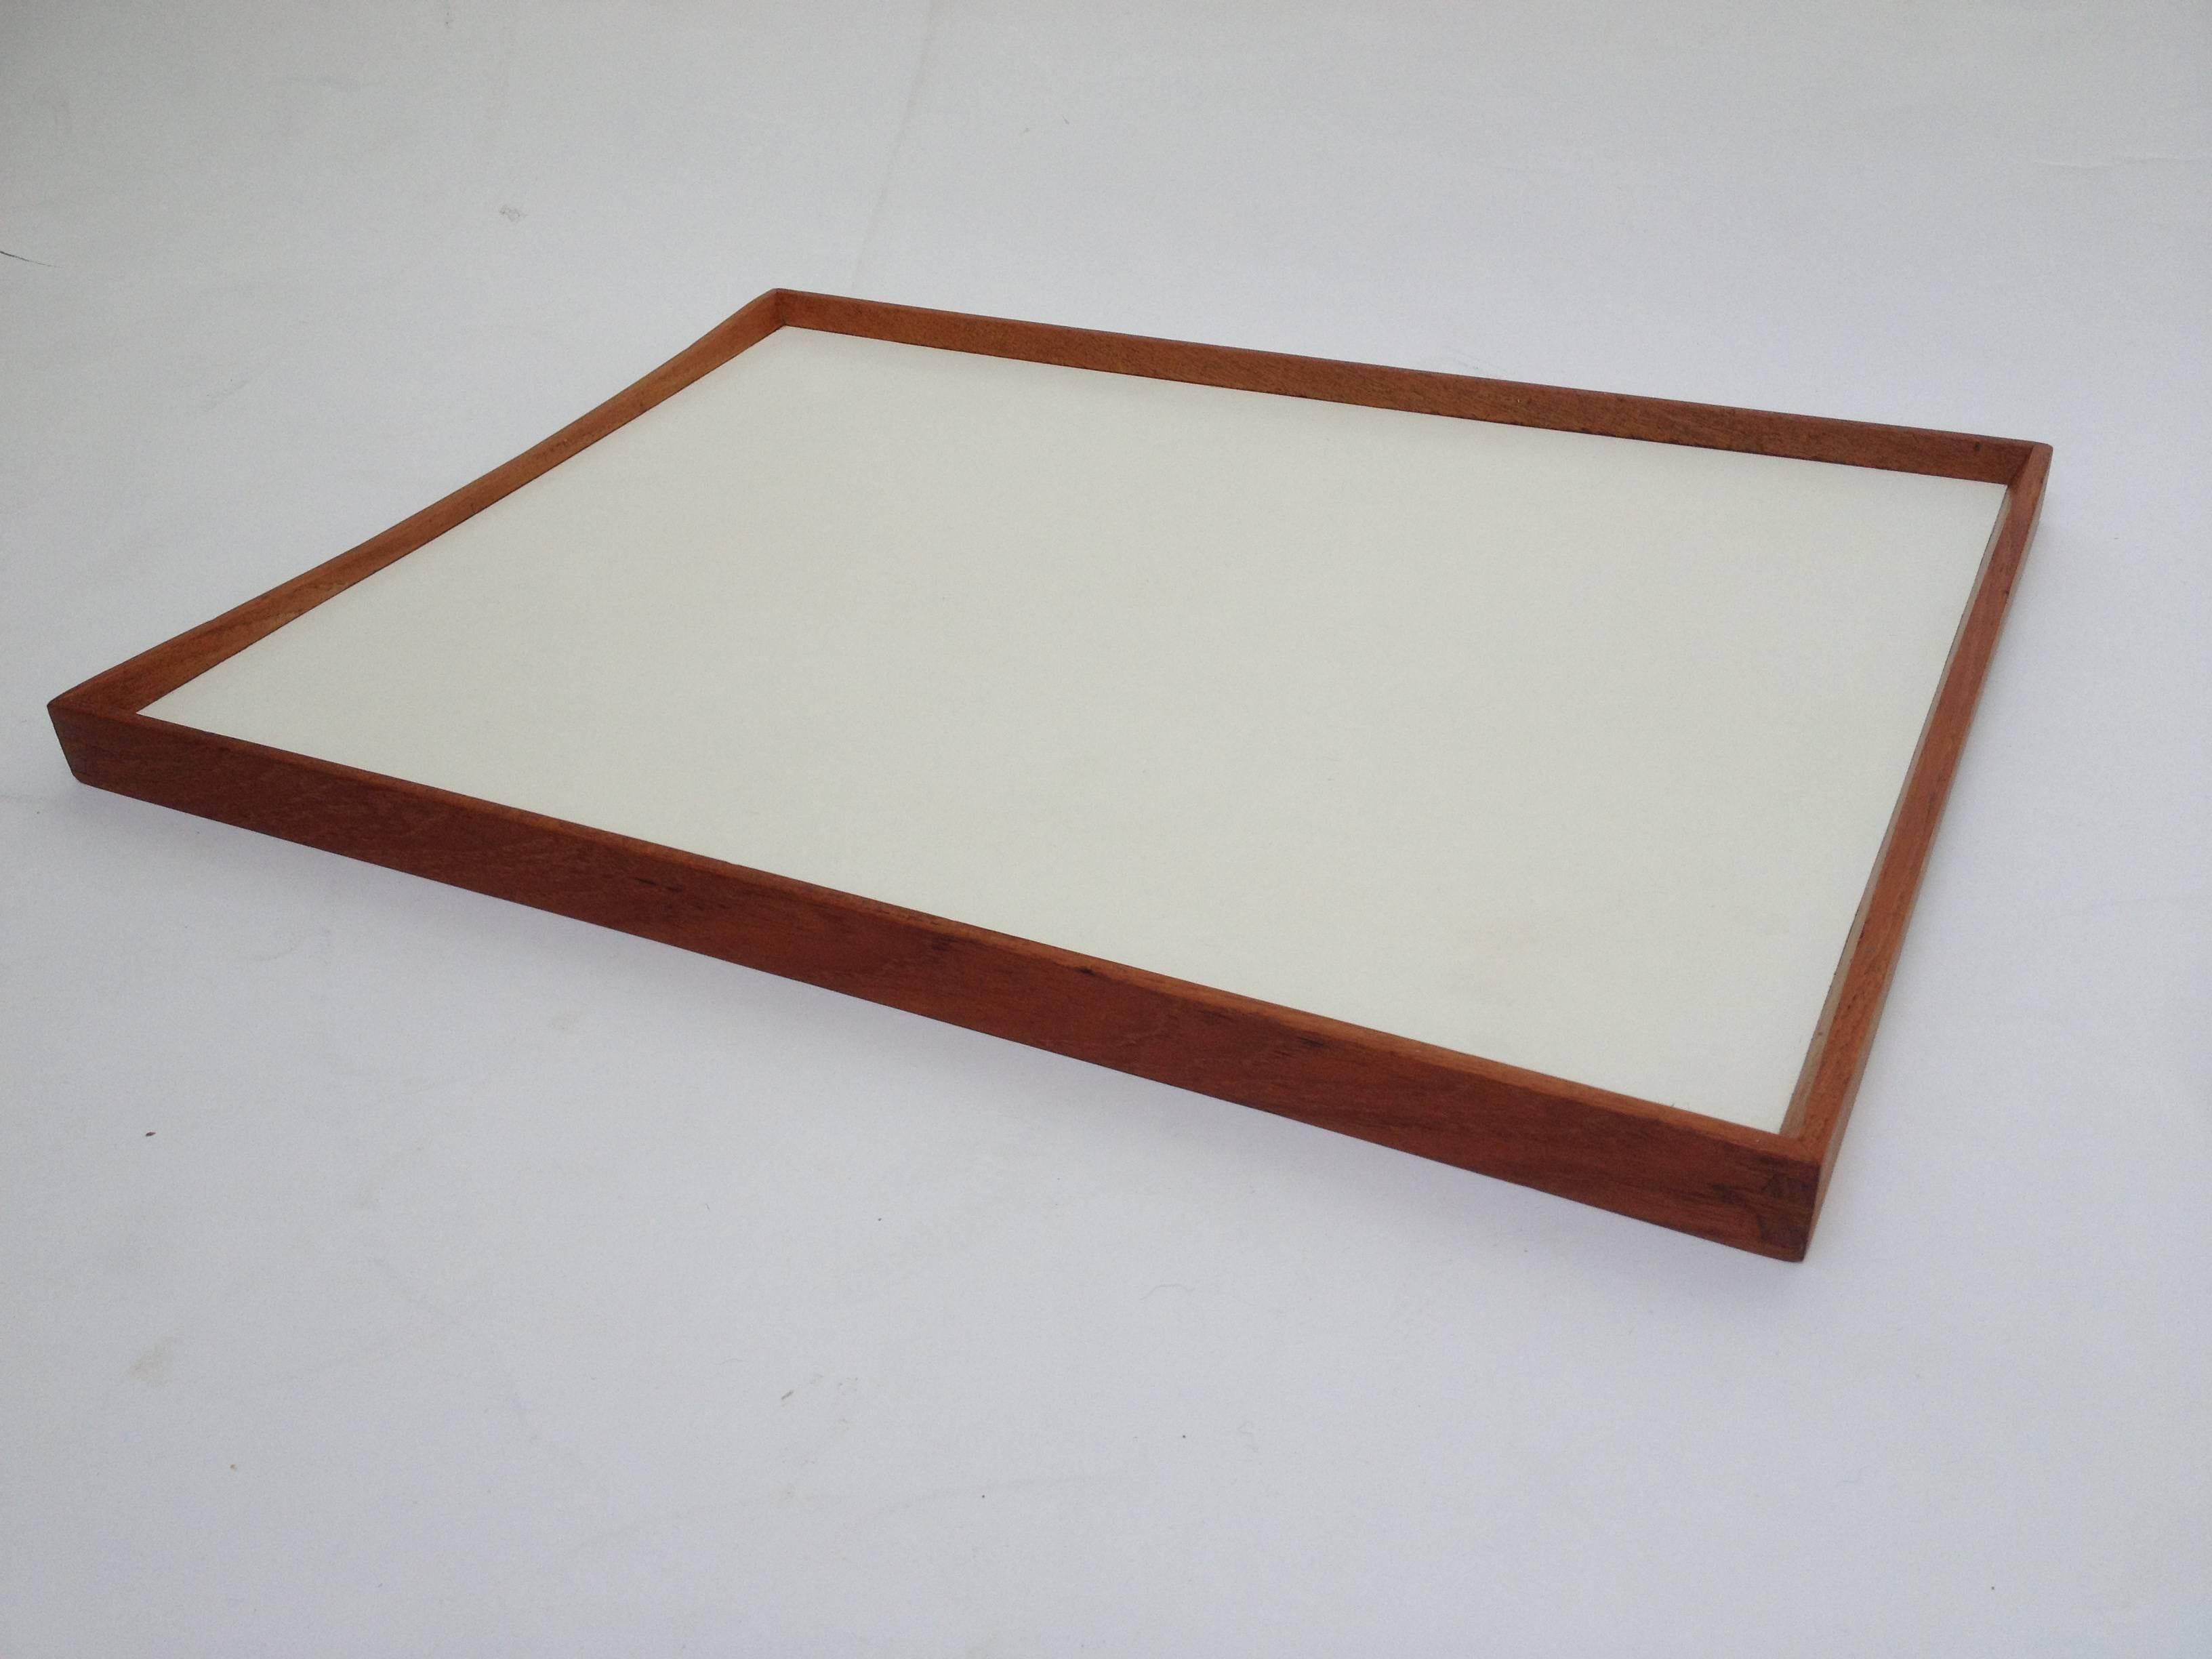 Gorgeous reversible tray designed by Finn Juhl, lovely dovetailed teak frame with off white and black laminated centers, very nice vintage condition, some wear to the tray tops and the wood... minor chip repair on one side (see photo) very well